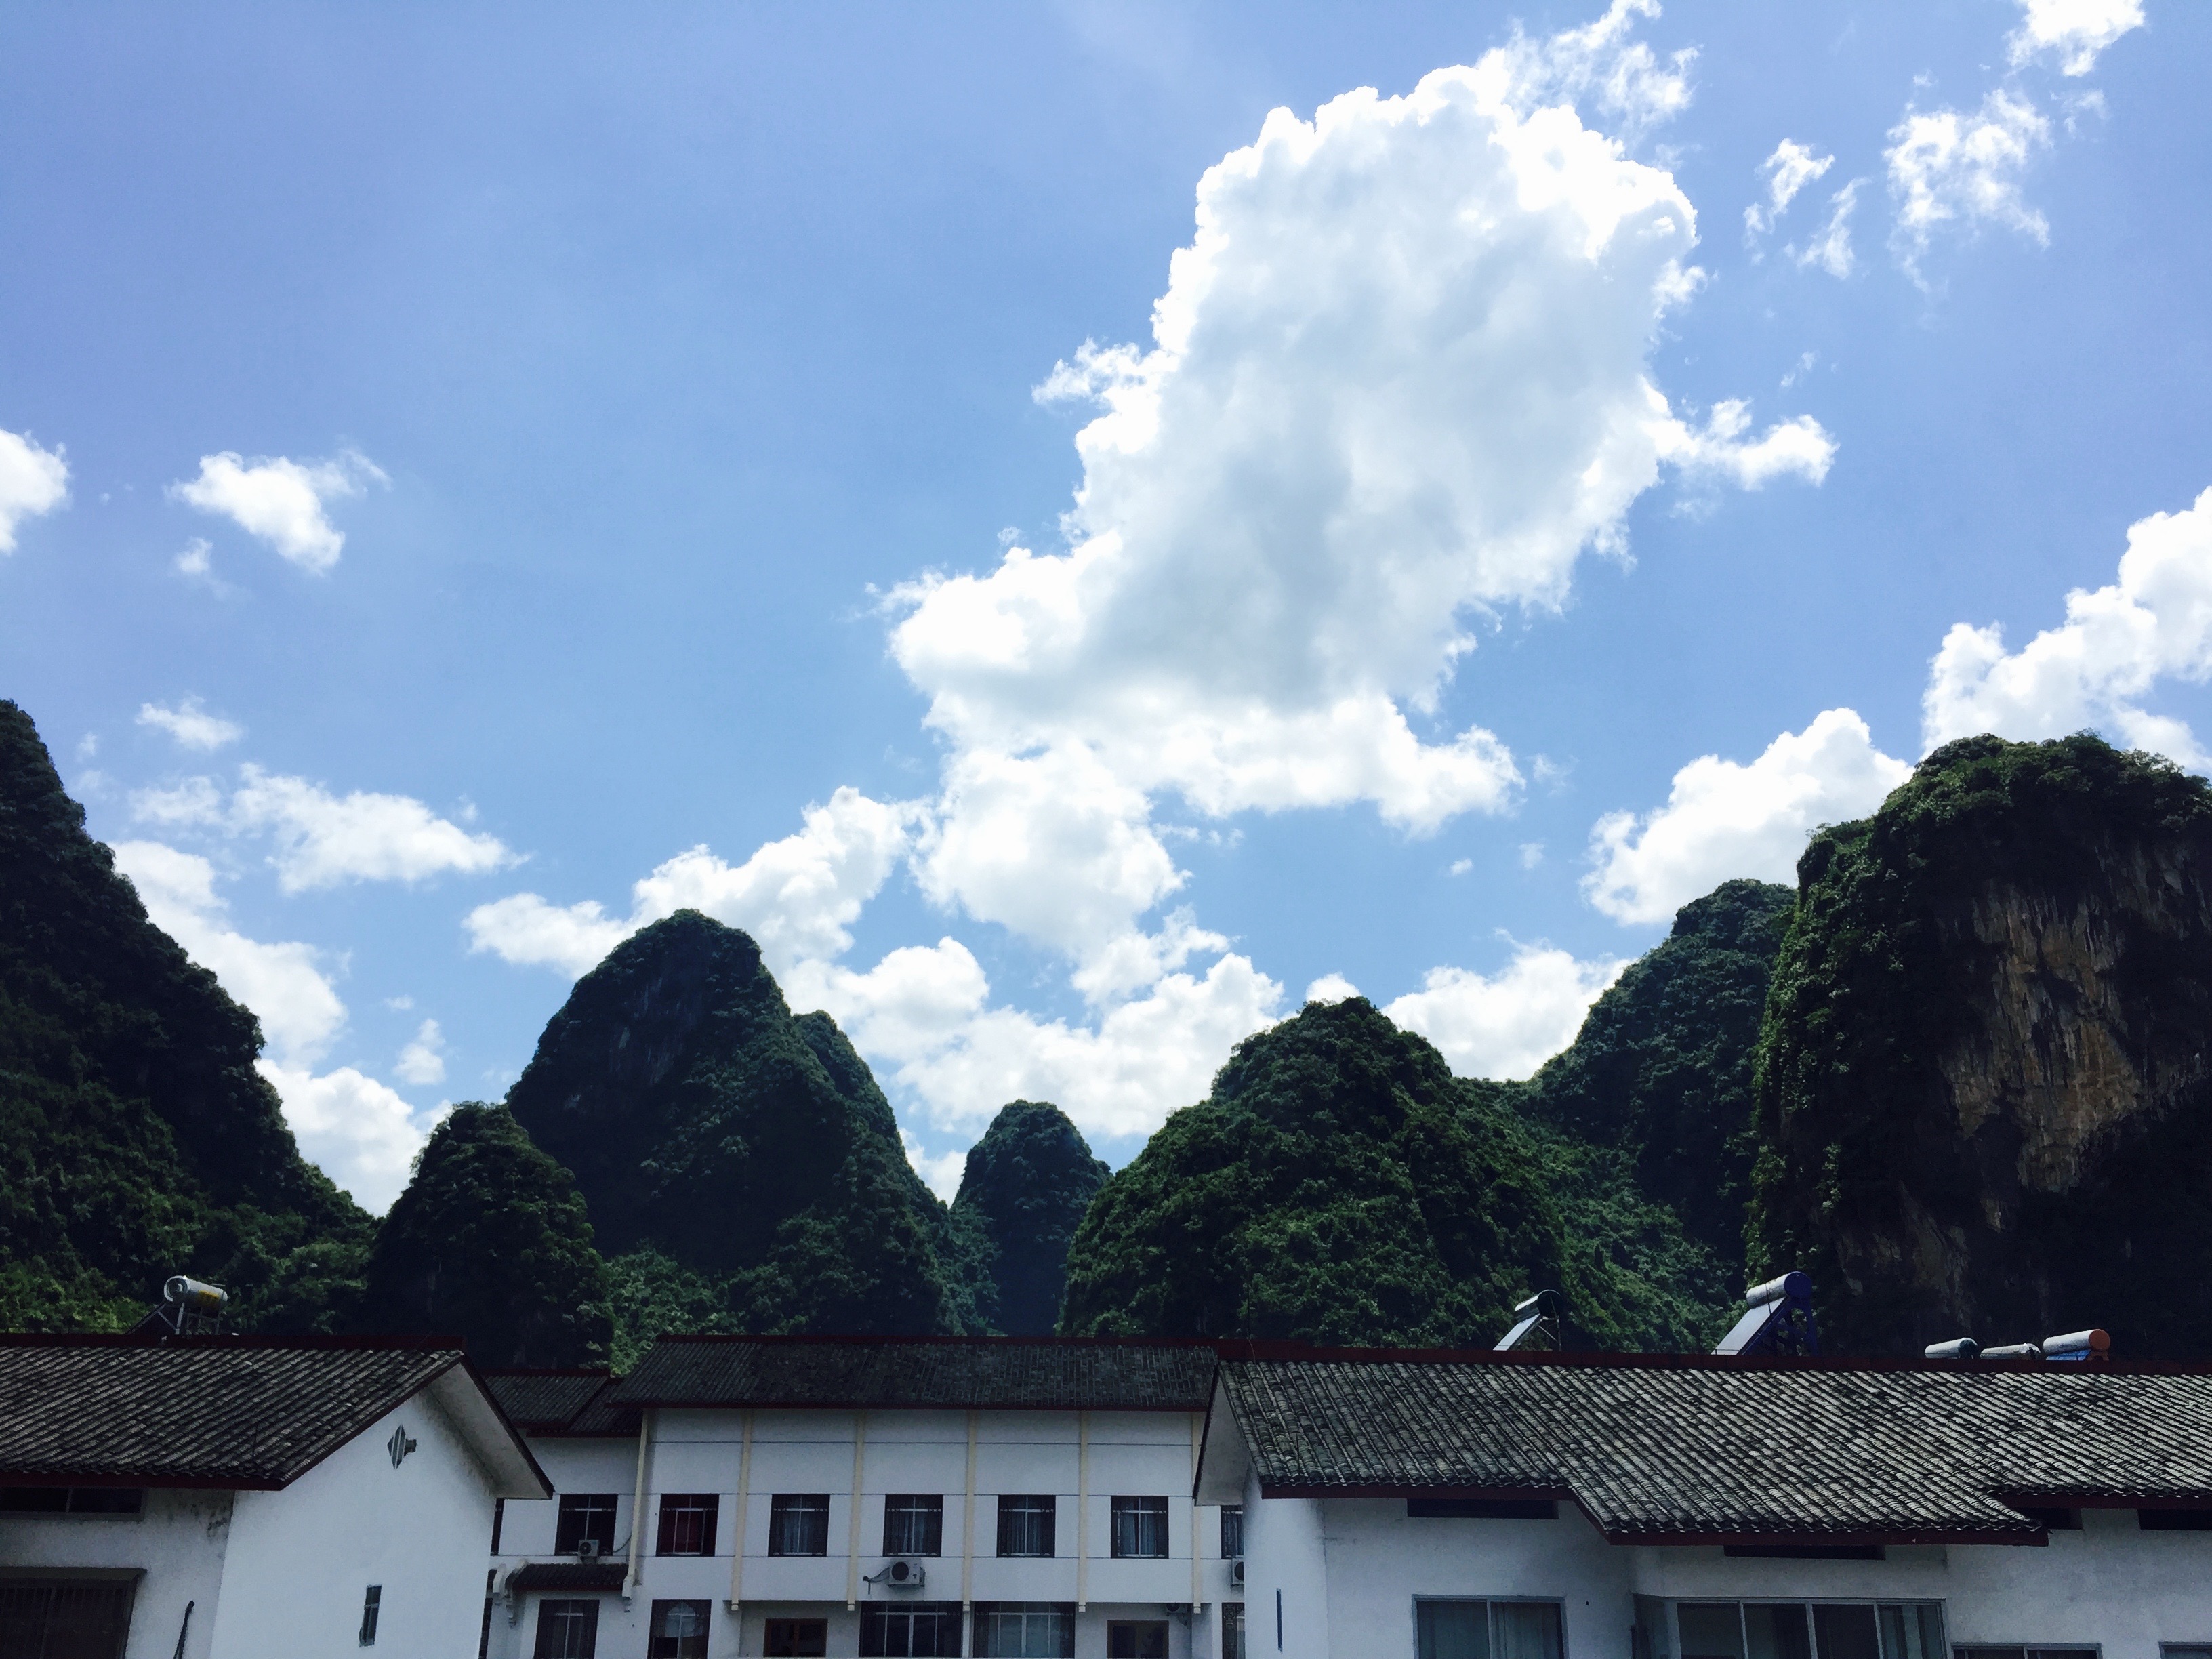 This was the view from my hostel room. I loved waking up tp these mountains and some rainy mornings they were covered by a wispy, thin clouds that twisted and curled around them like a traditional Chinese painting. 